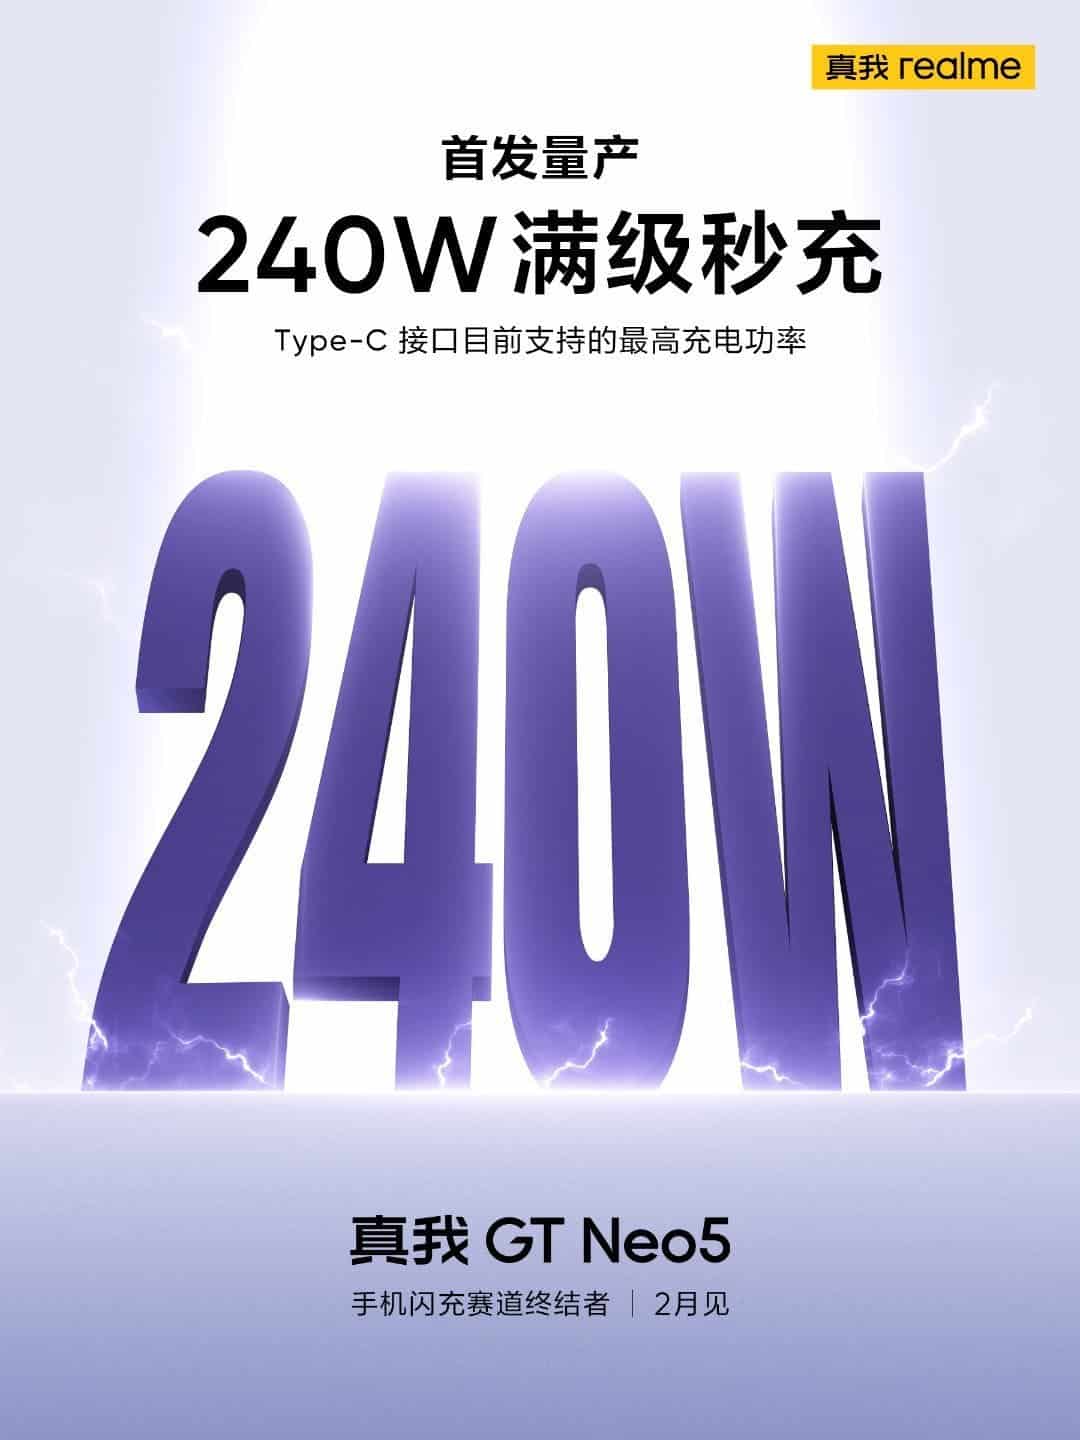 Realme 240W fast charging